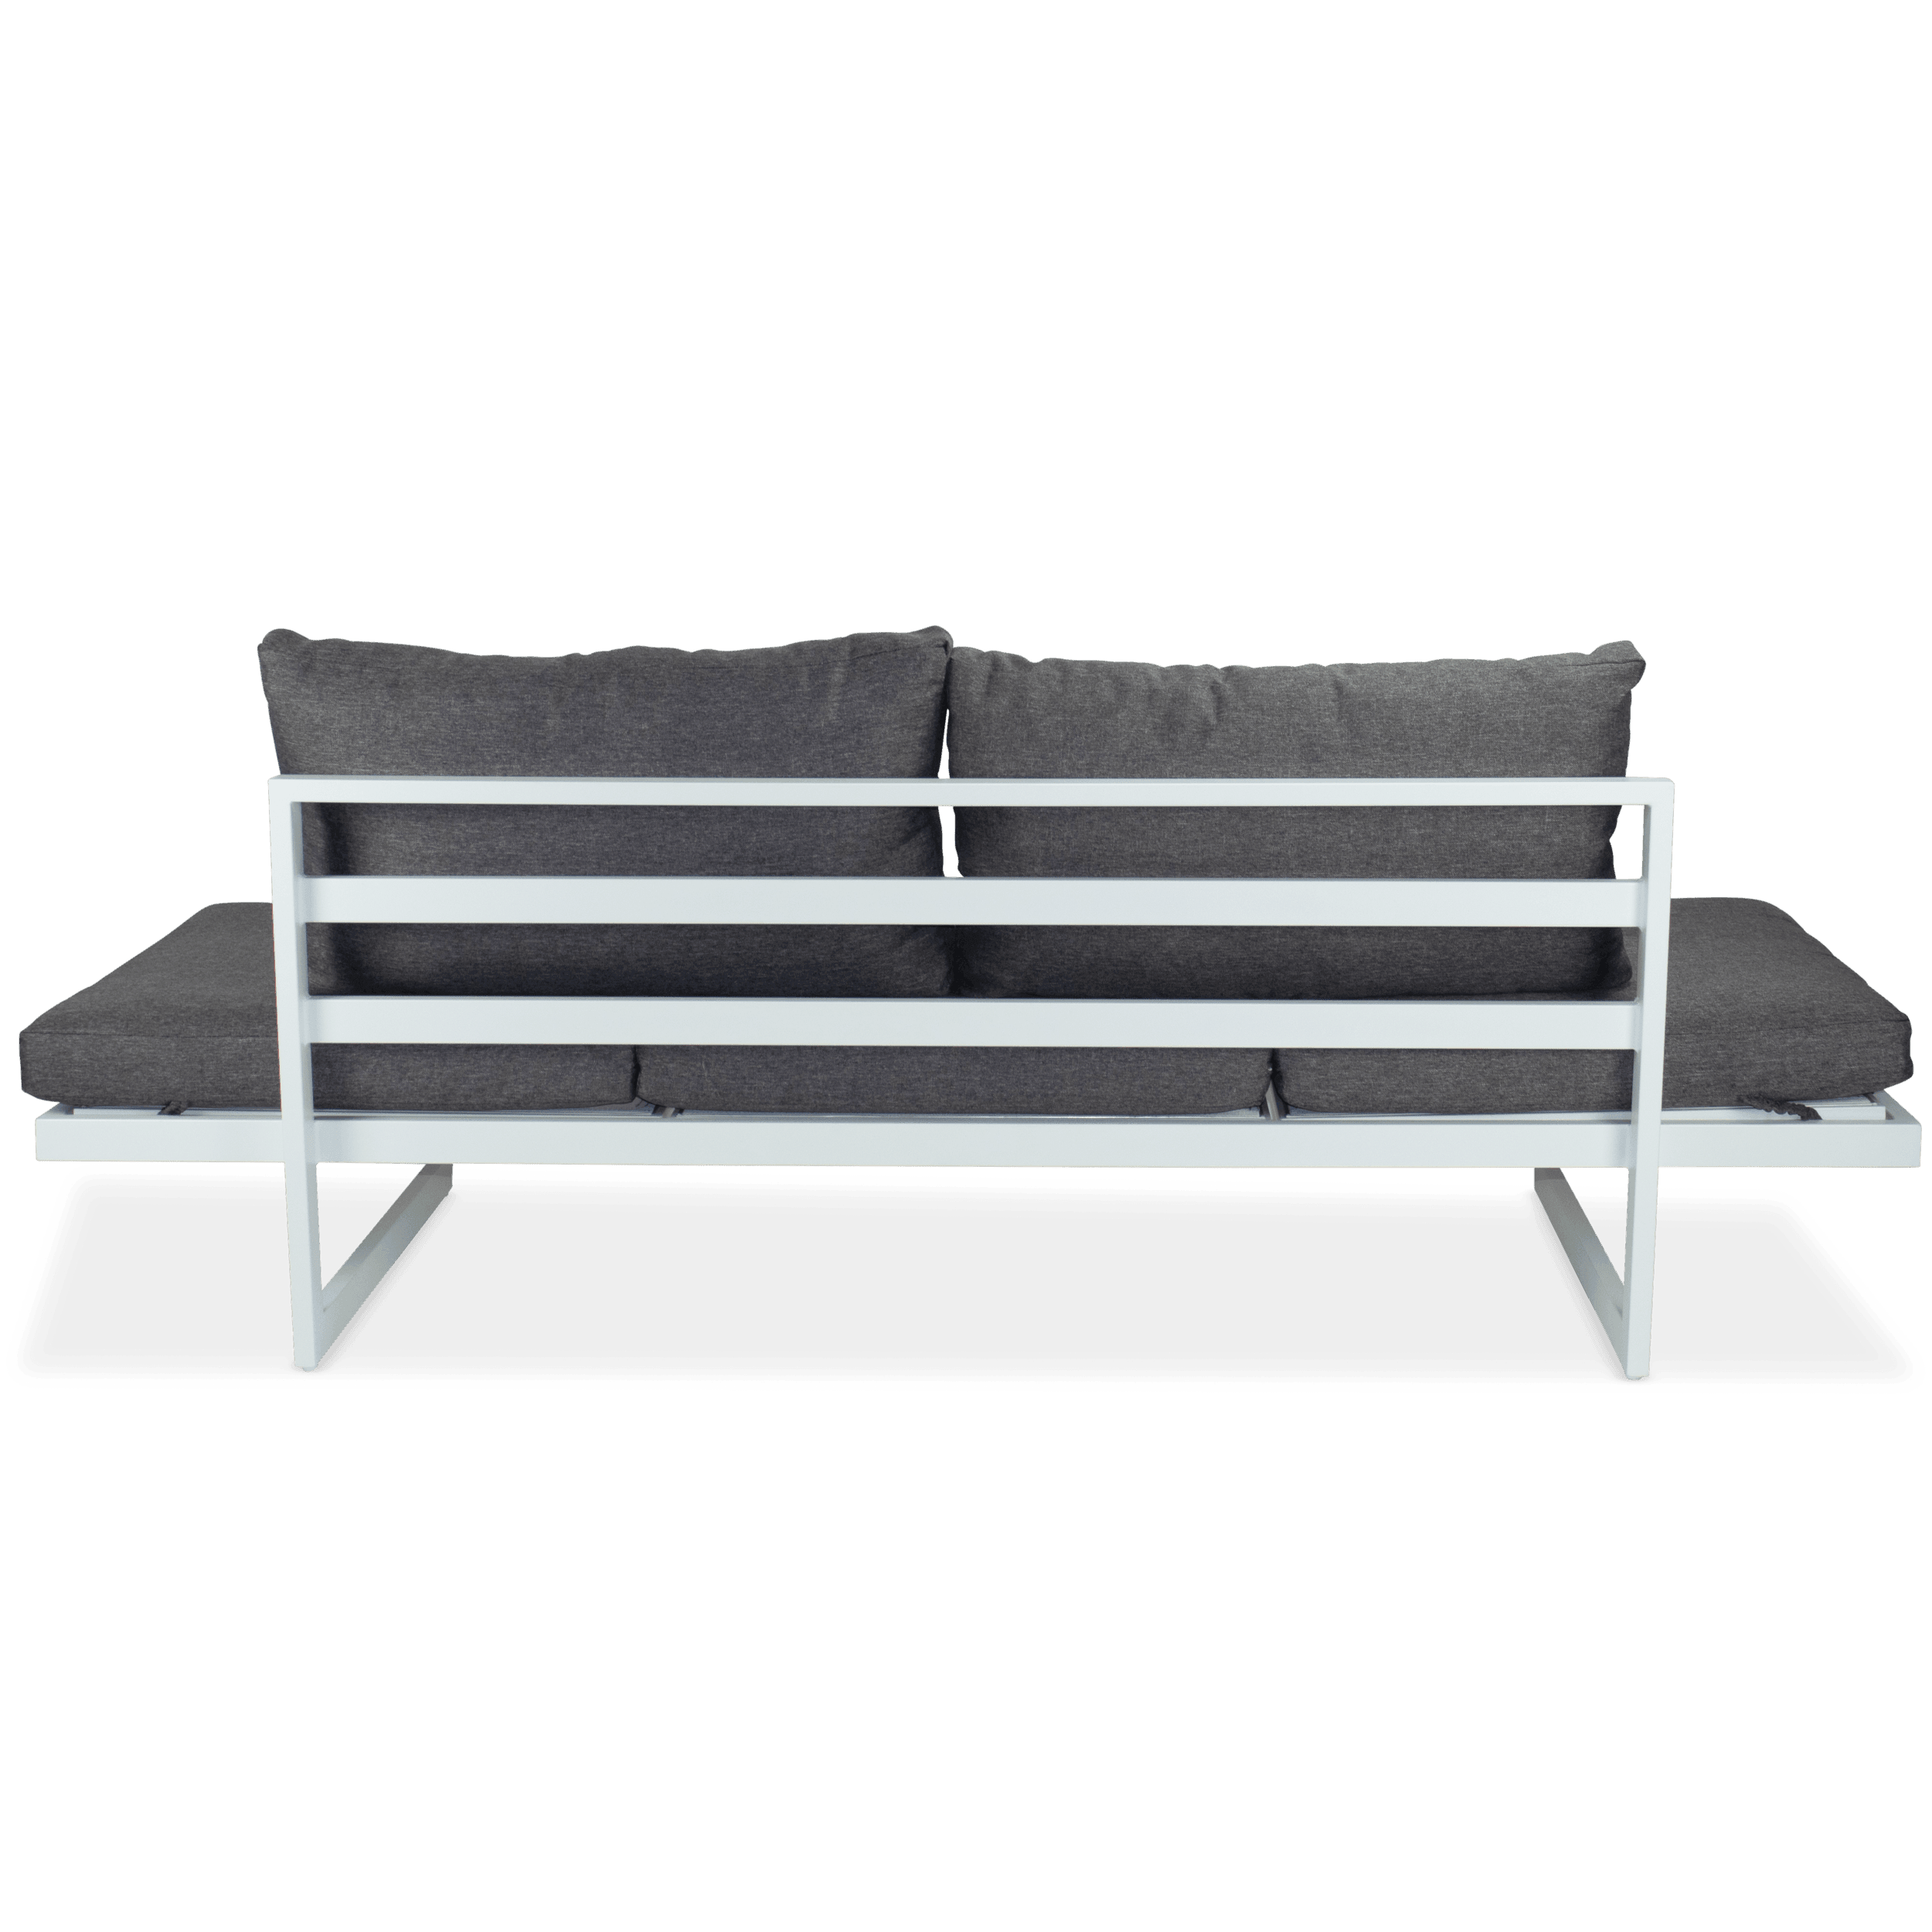 Milan 3 Seater with Dual Sunlounger Functionality in Arctic White Frame and Pebble Olefin Cushions - The Furniture Shack